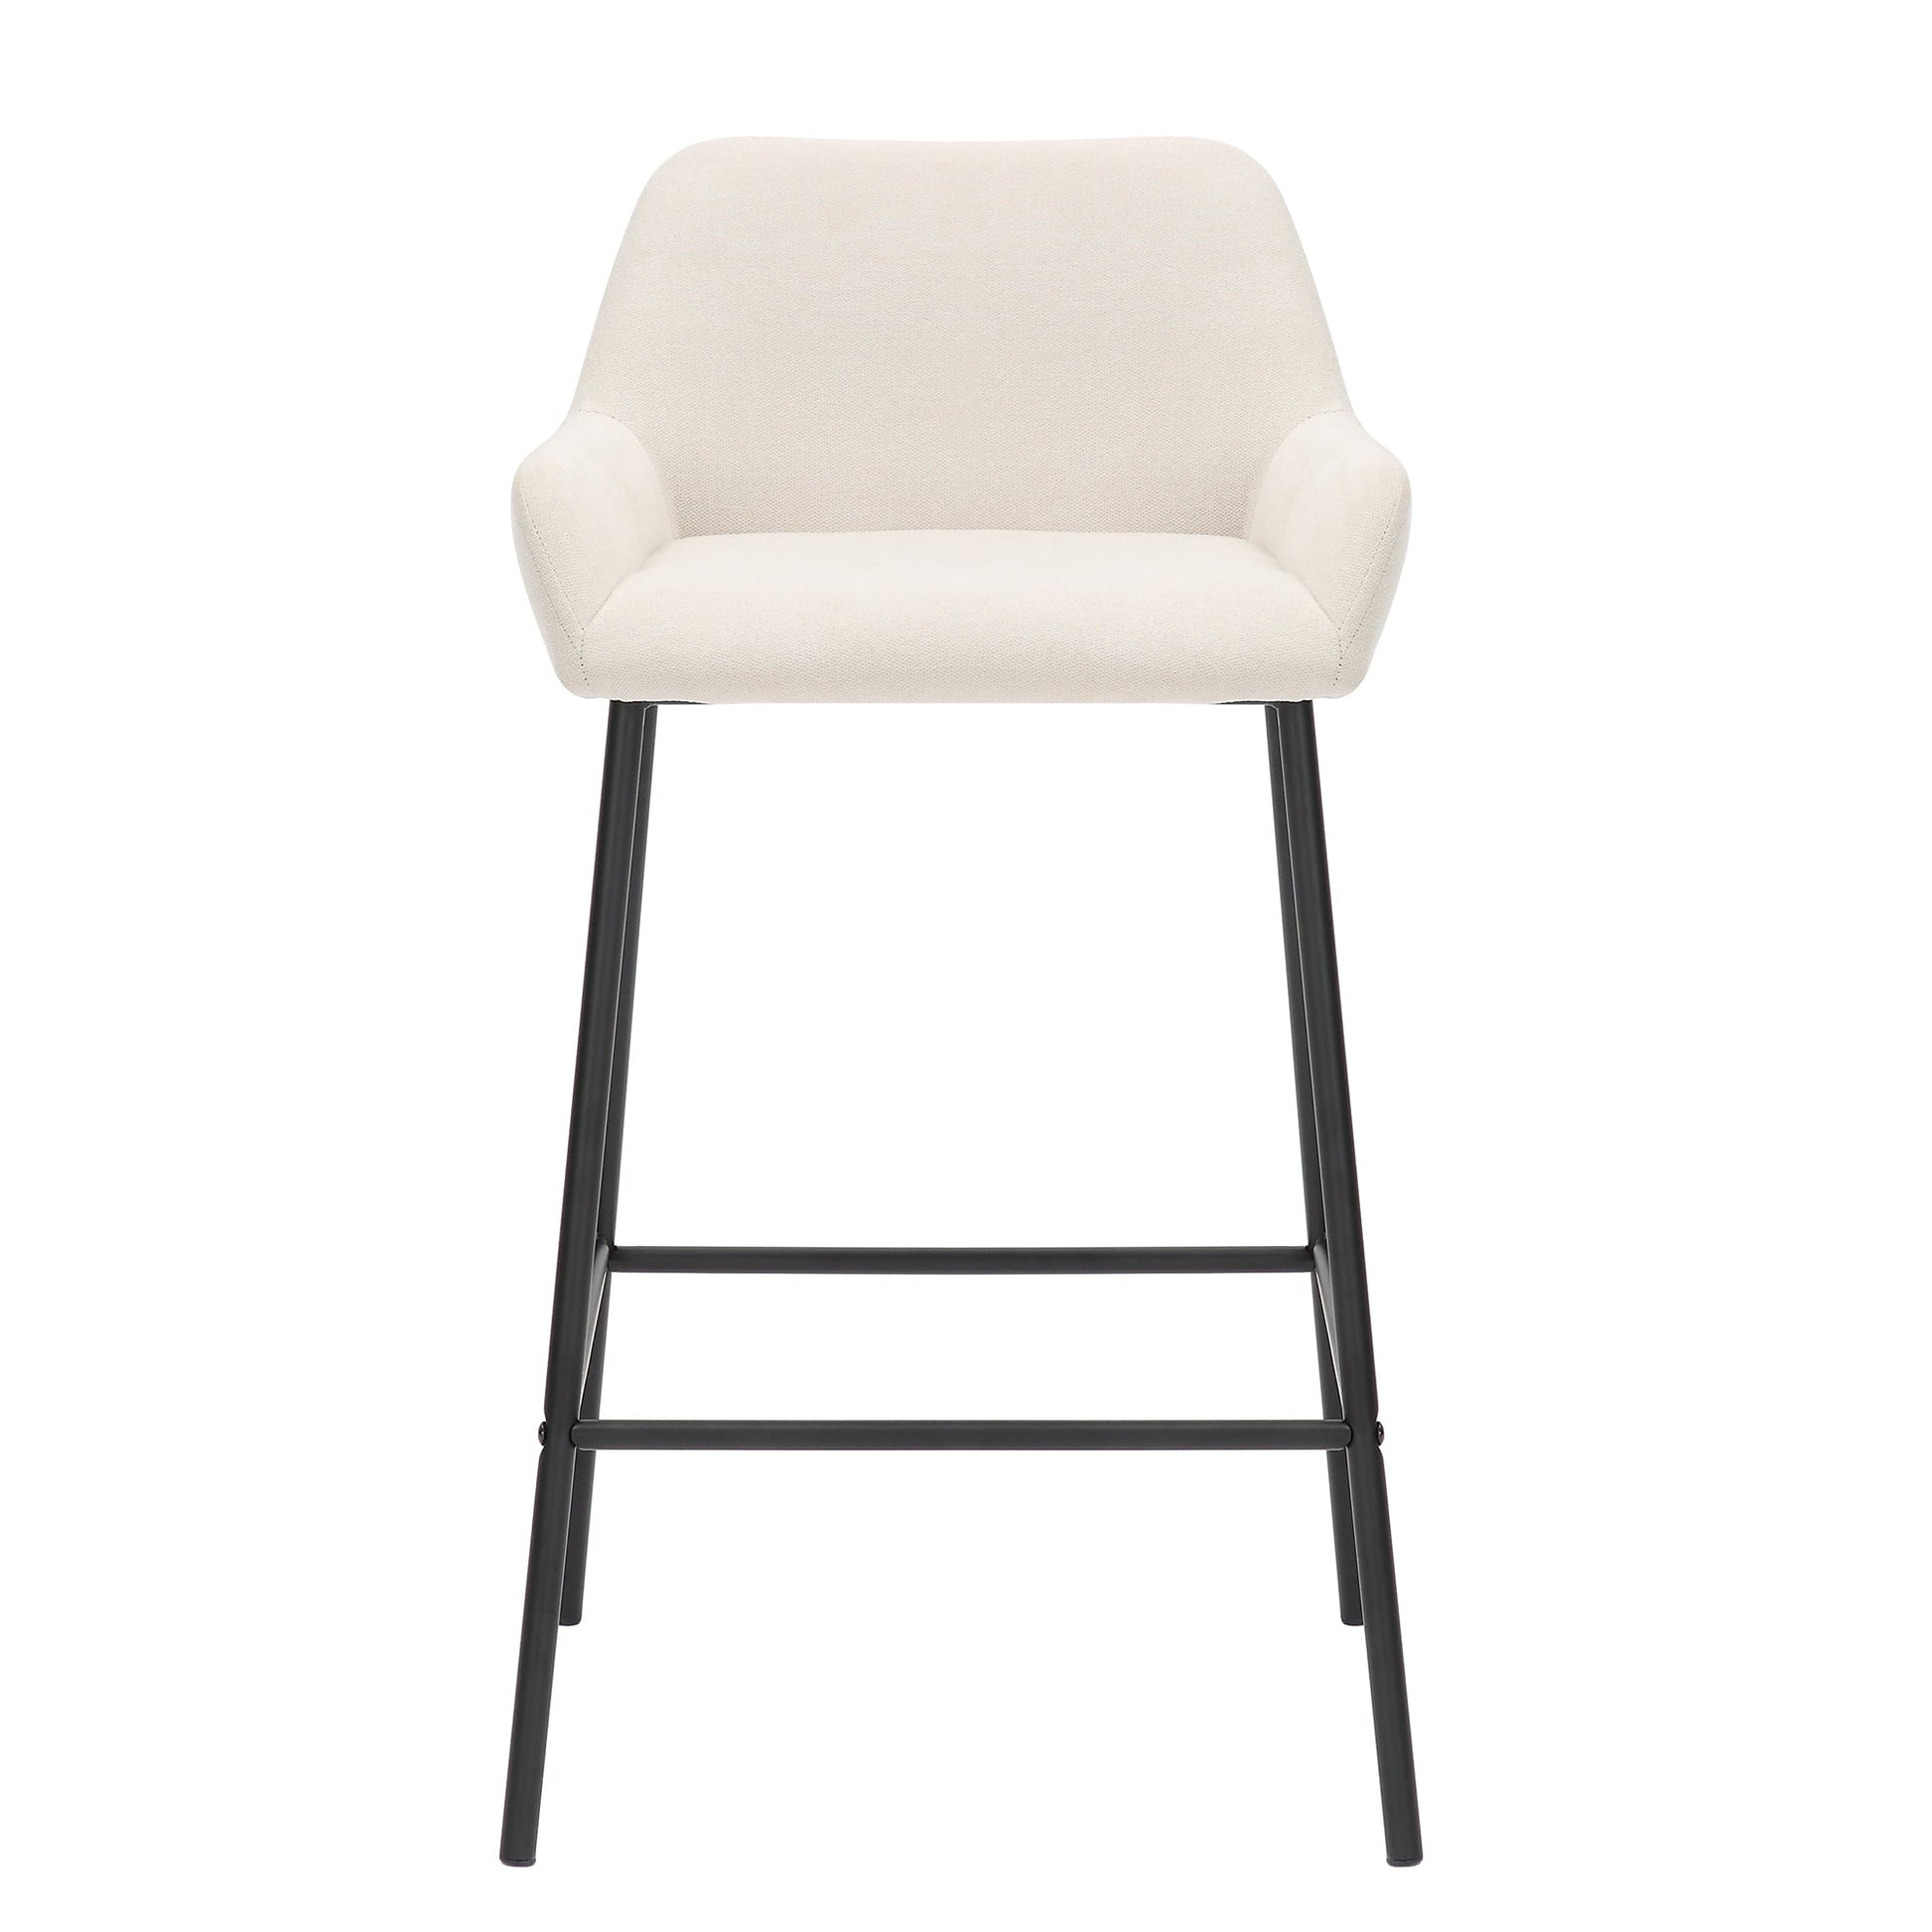 26 inch Bar Stools | Sets of 2 | Baily Cream and Black - Your Bar Stools Canada